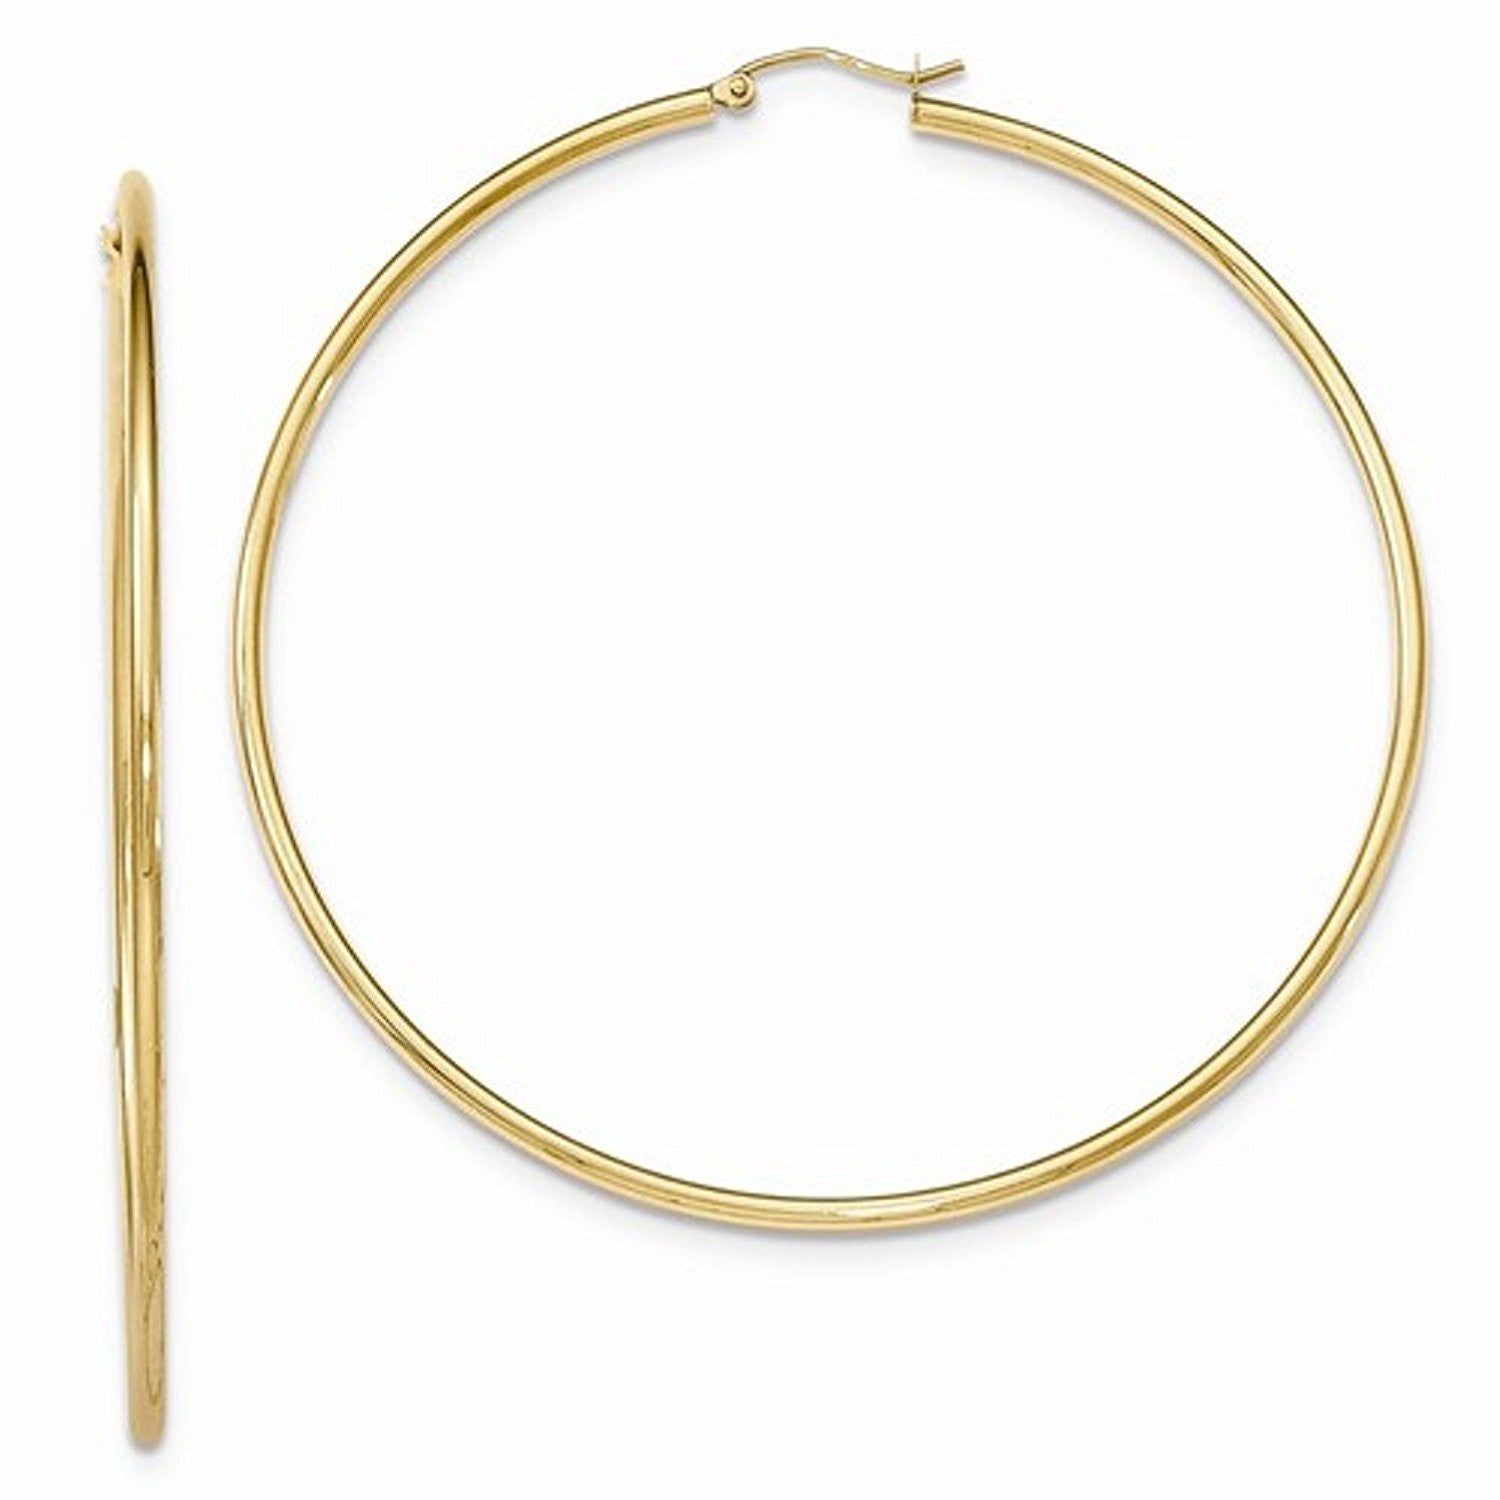 14K Yellow Gold 70mm x 2mm Round Classic Hoop Earrings